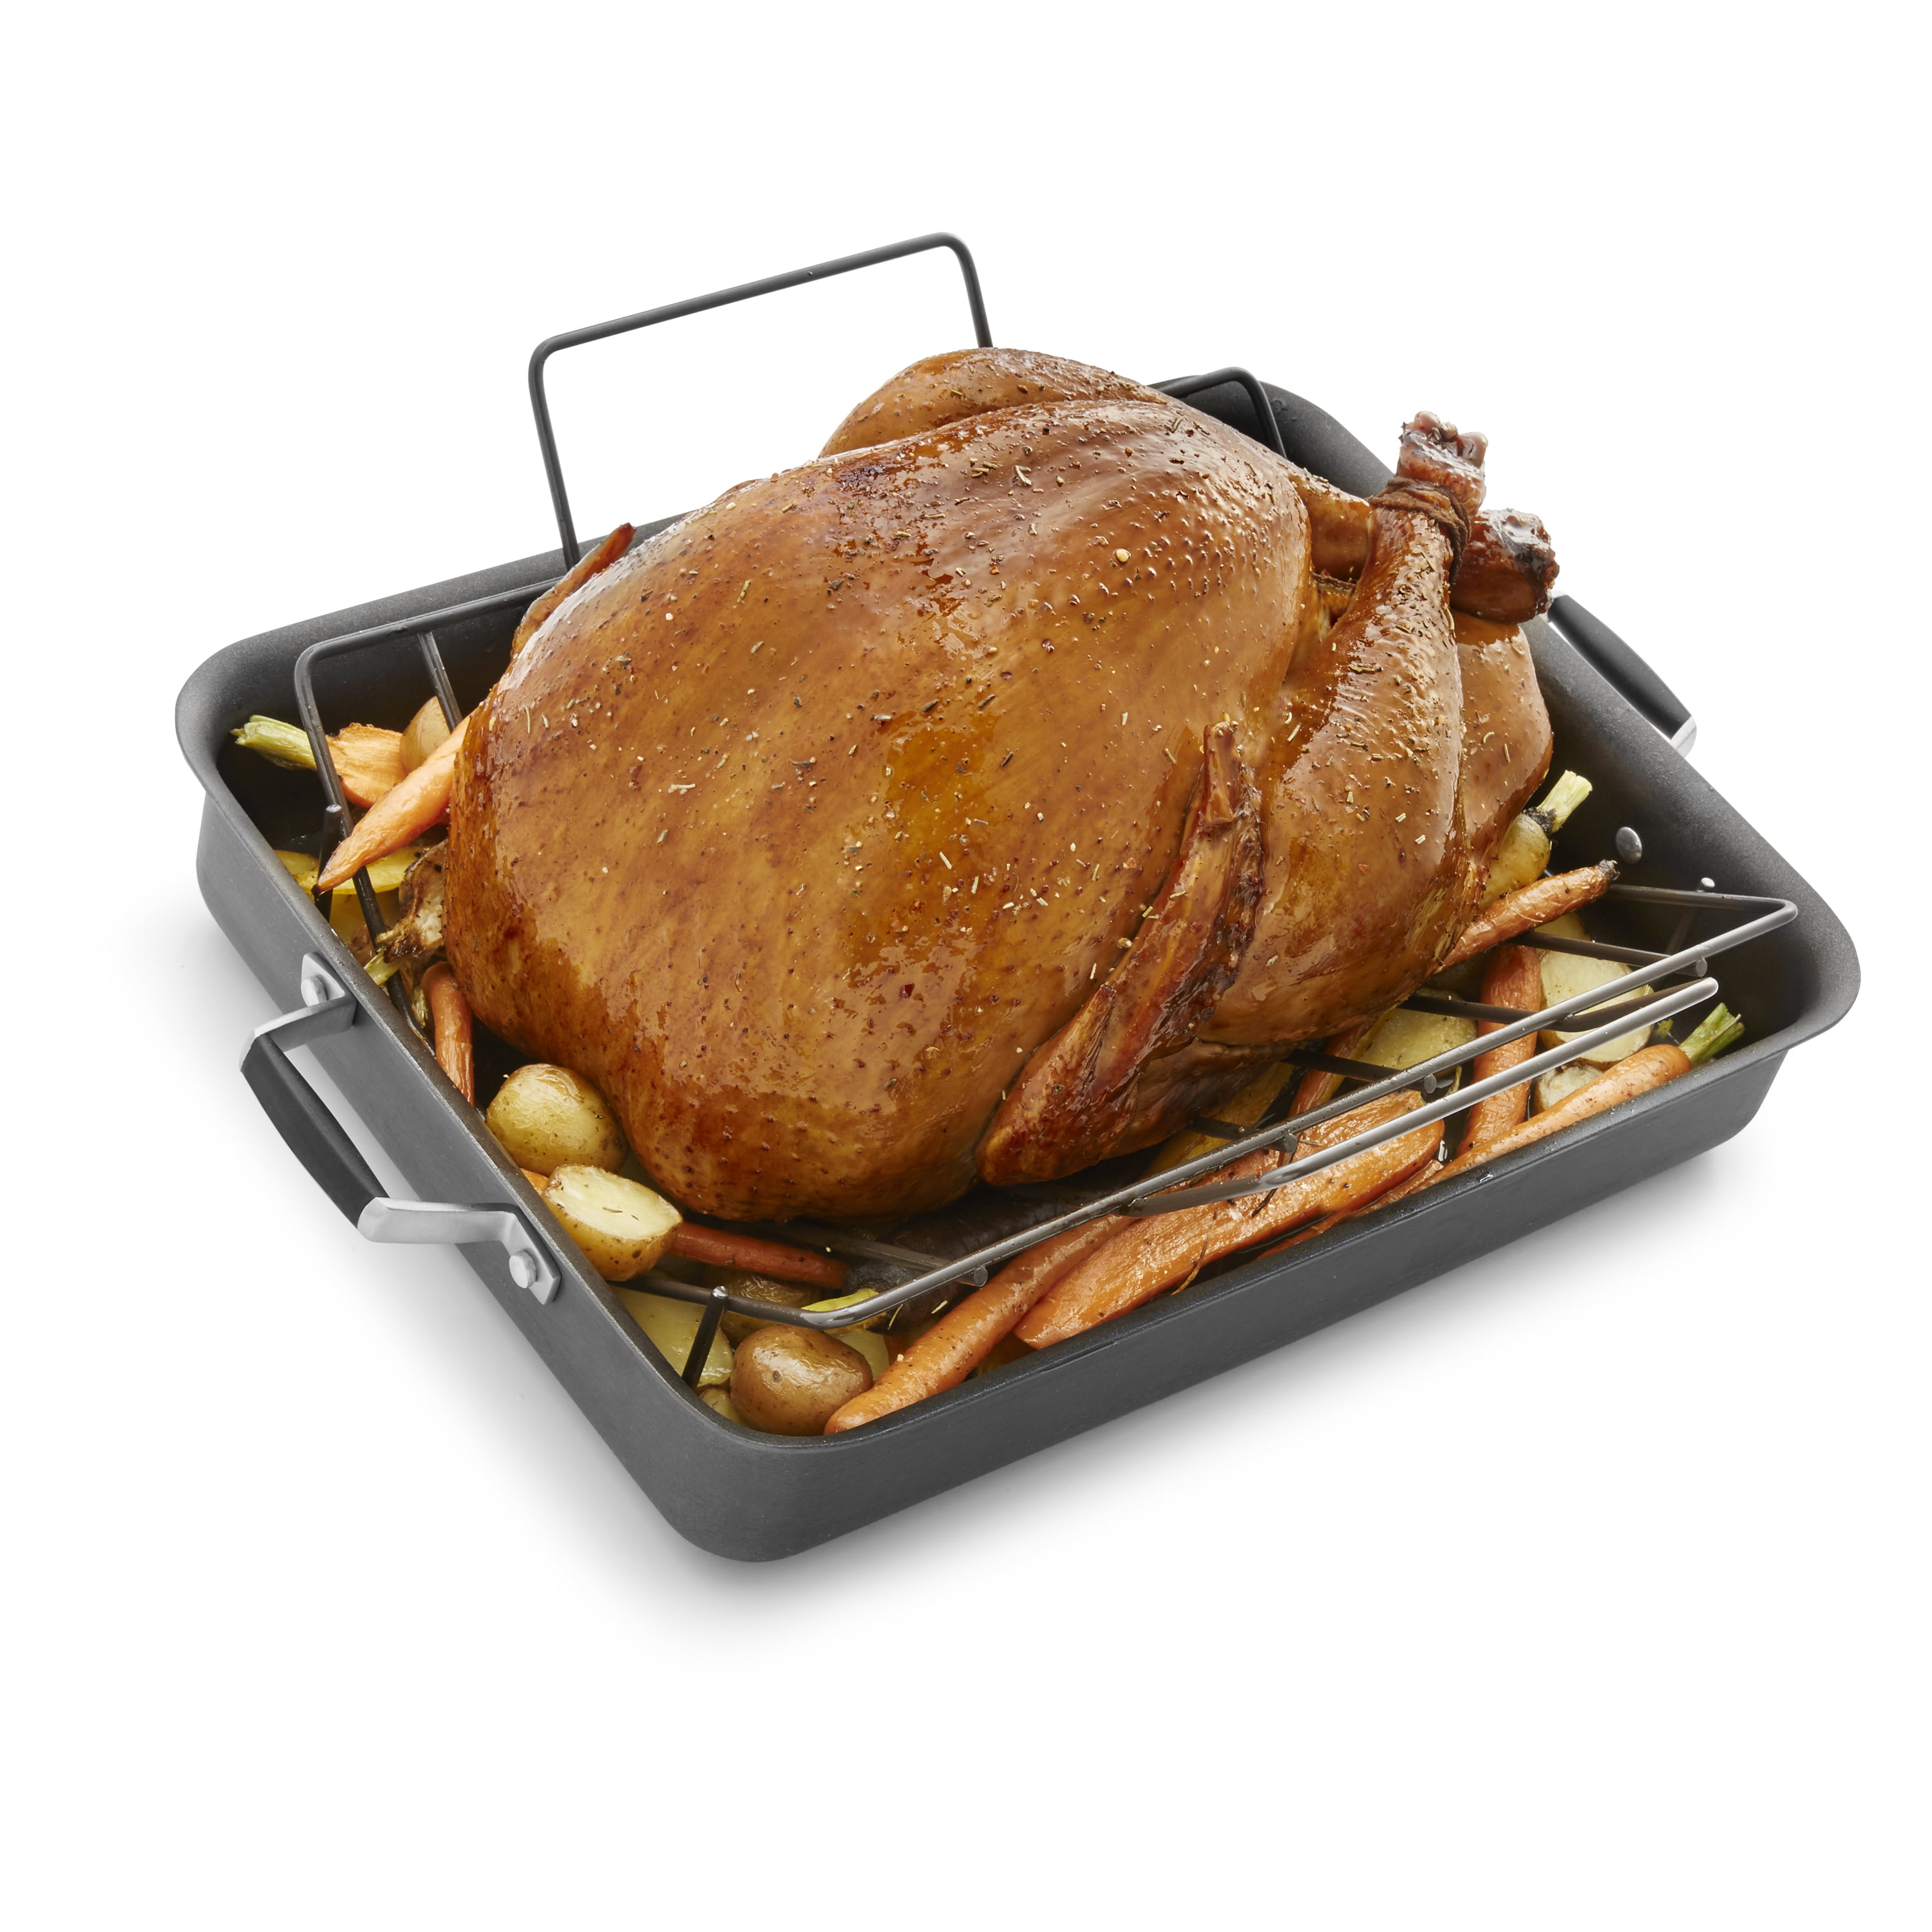 Classic™ Hard-Anodized Nonstick 16-Inch Roaster with Rack